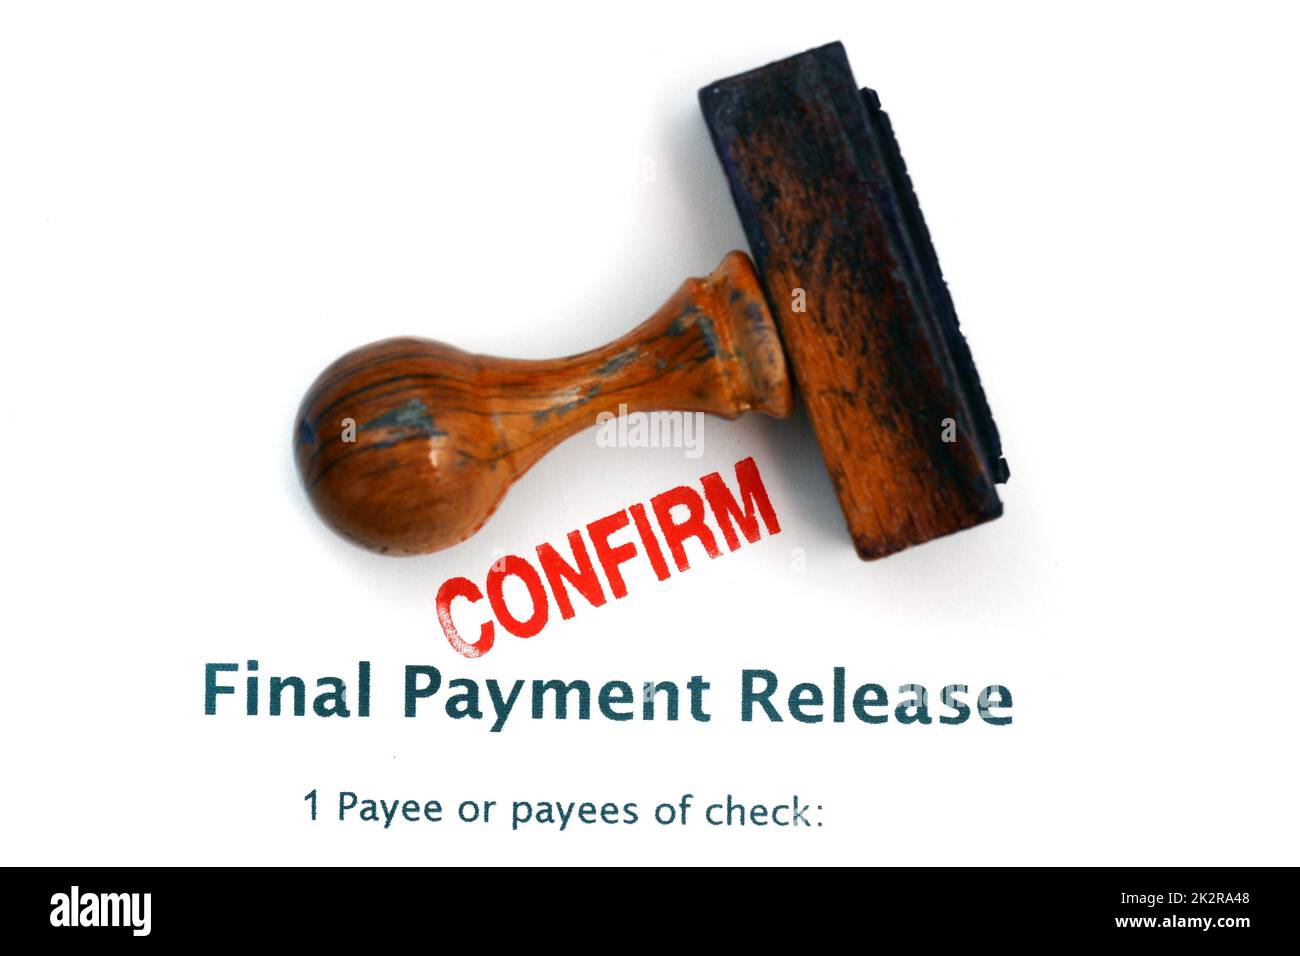 Final payment - confirm Stock Photo